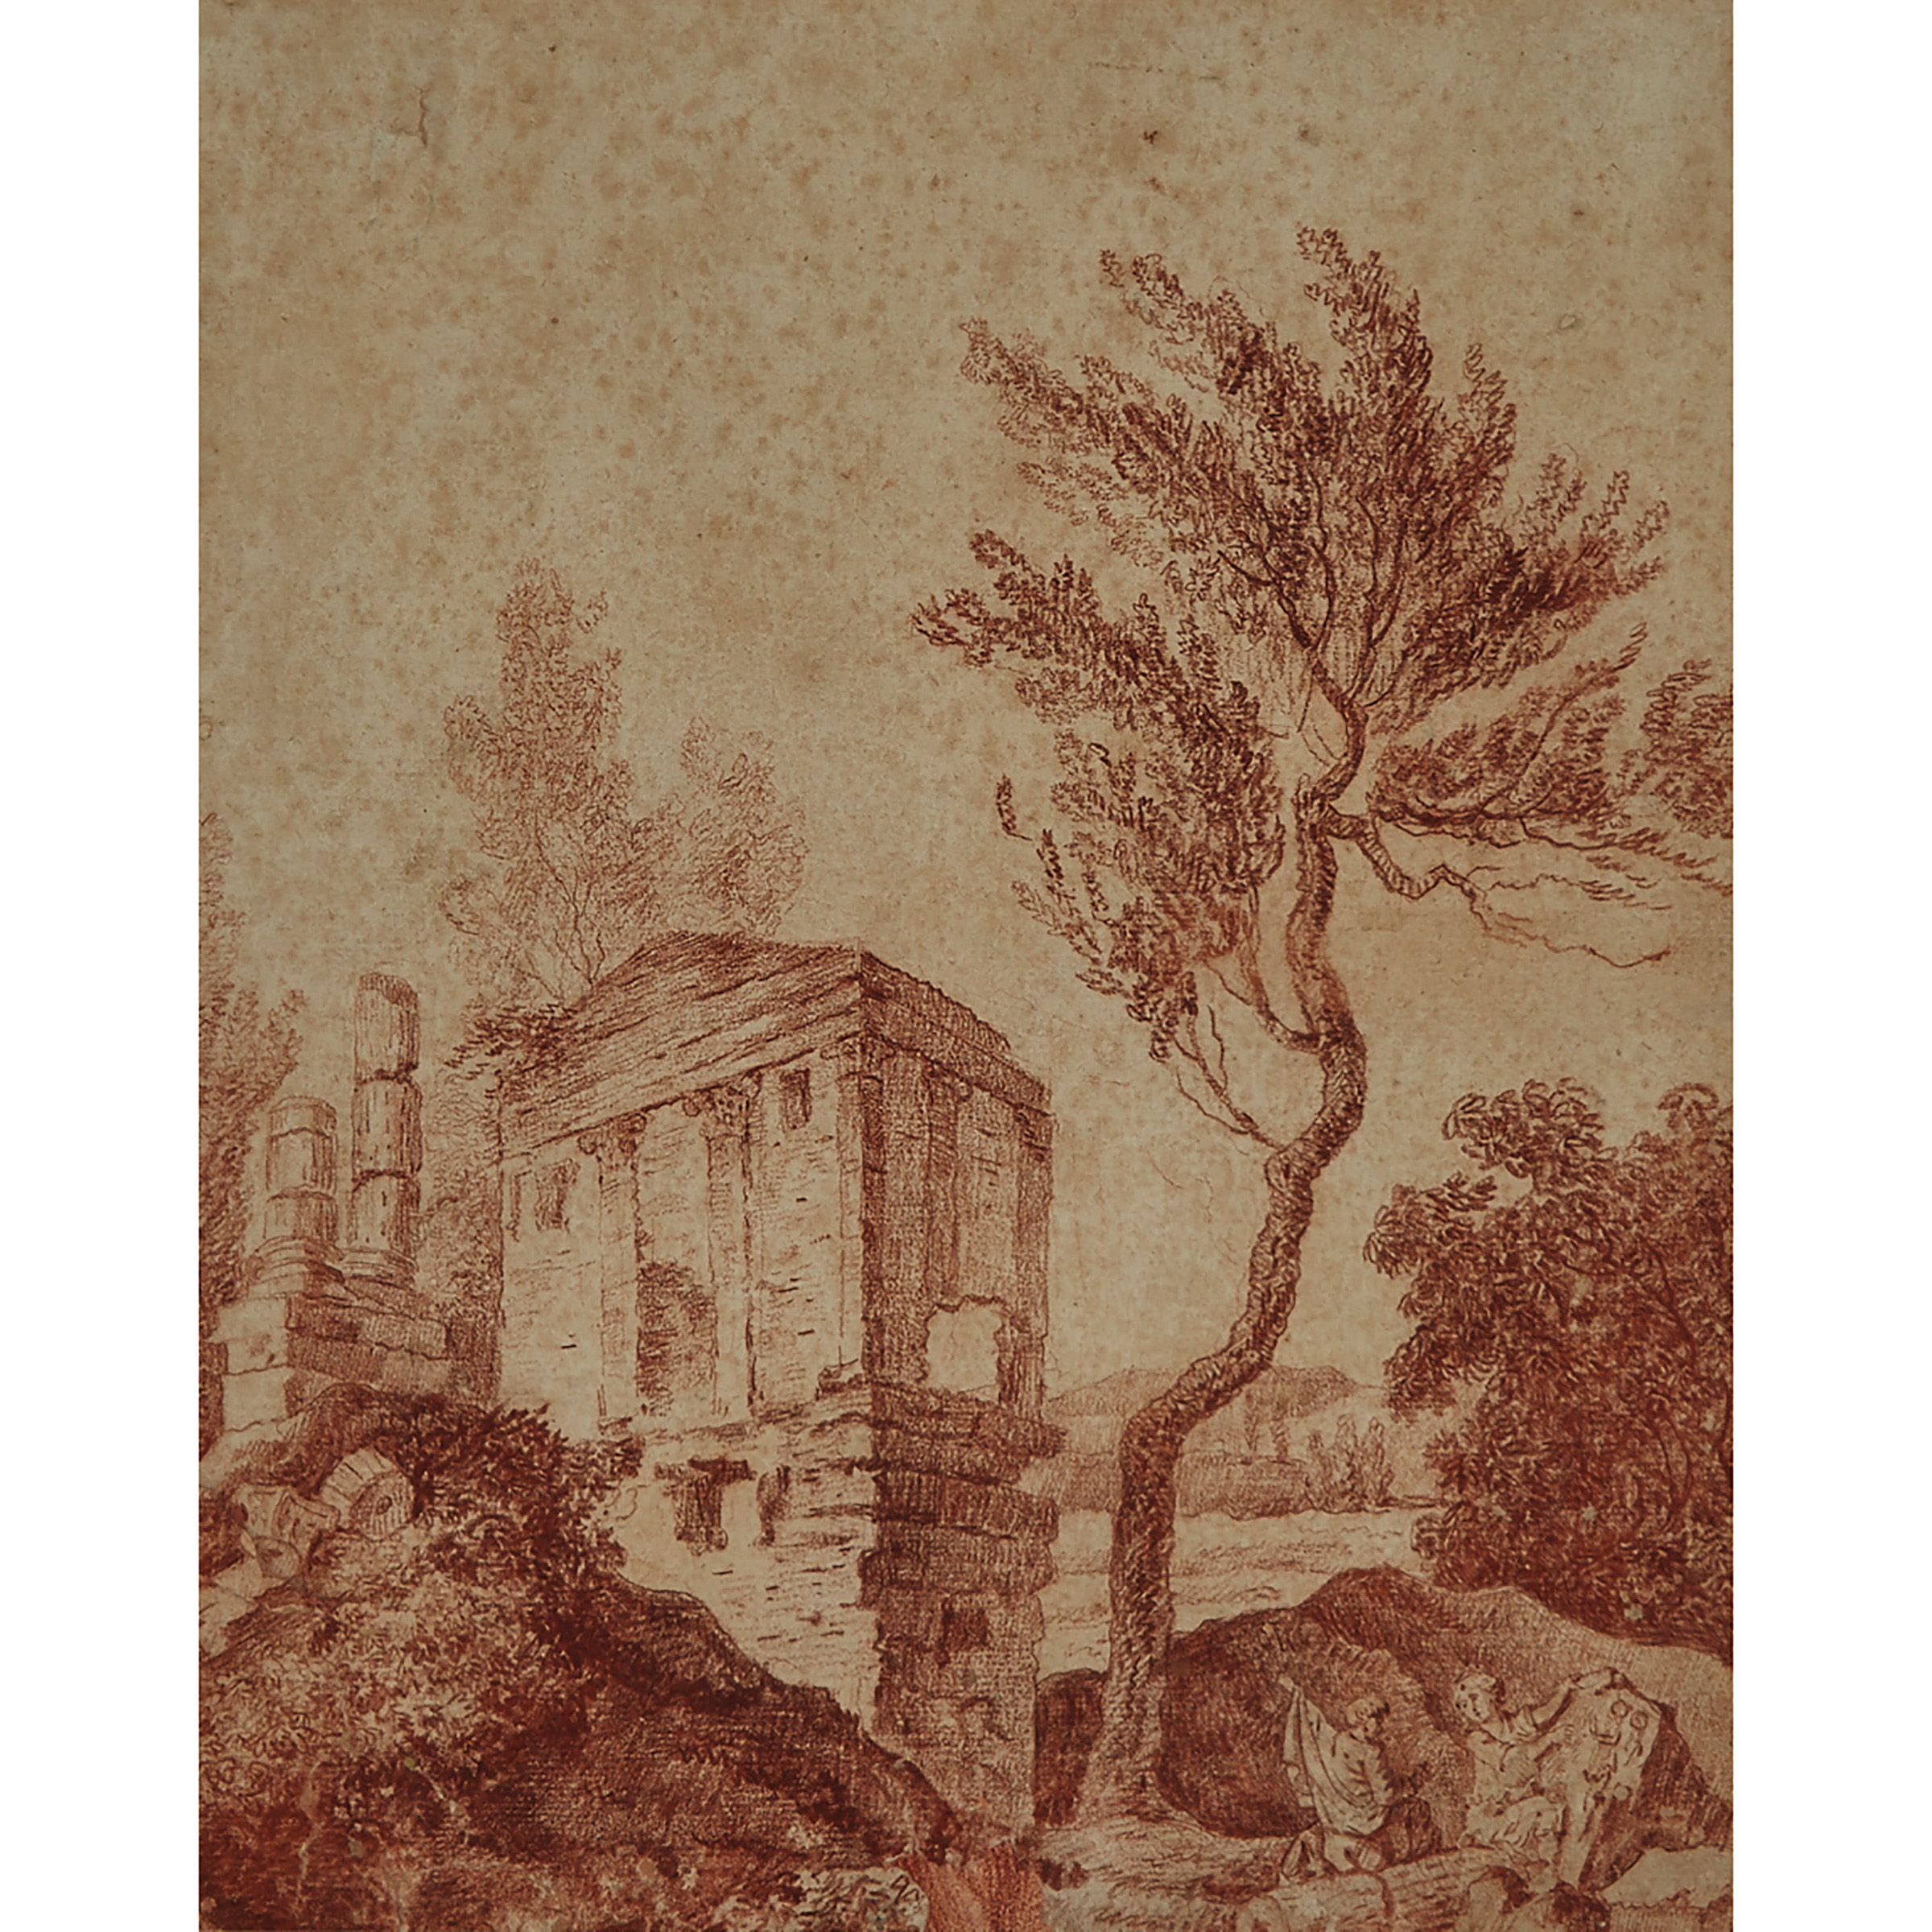 Attributed to Richard Earlom (1743–1822) After Claude Lorrain (1600–1682)